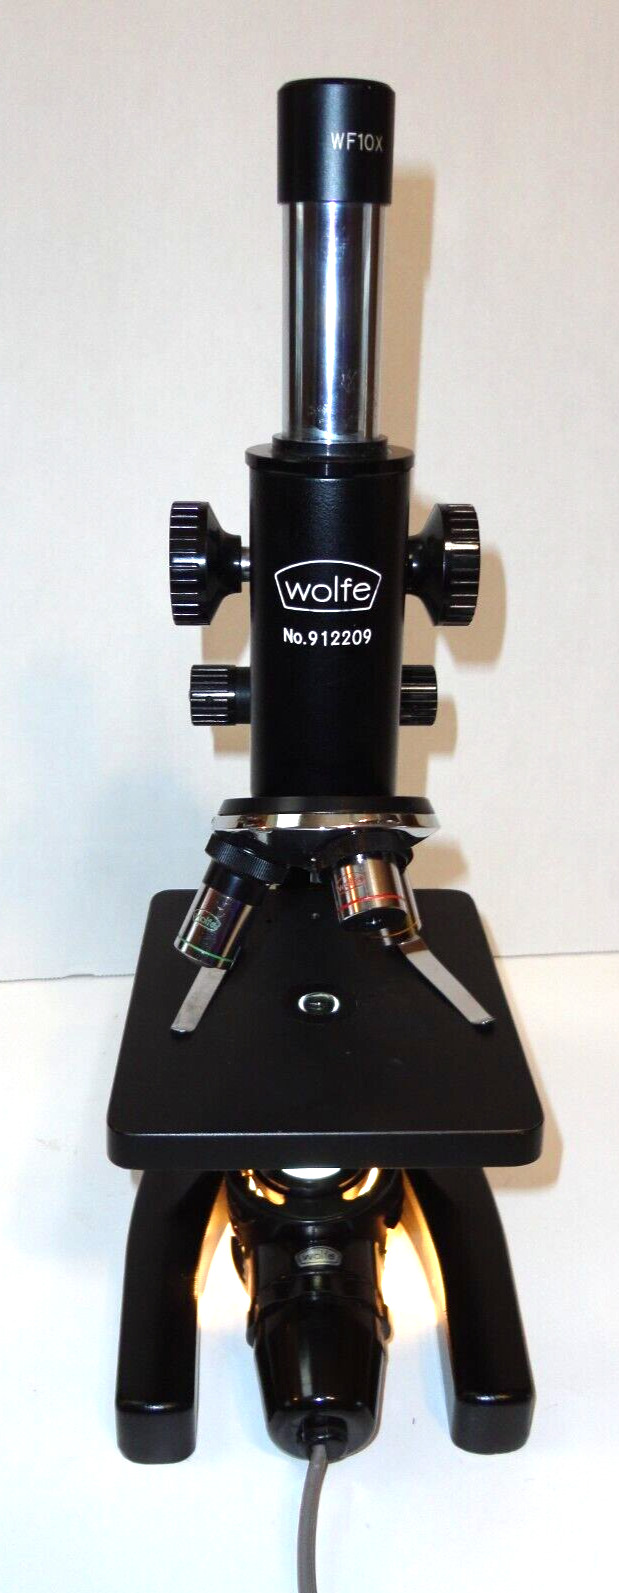 Vtg. Wolfe Microscope, No. 912209, 3 Objective Lenses 4 ,10, 45 W/working Light